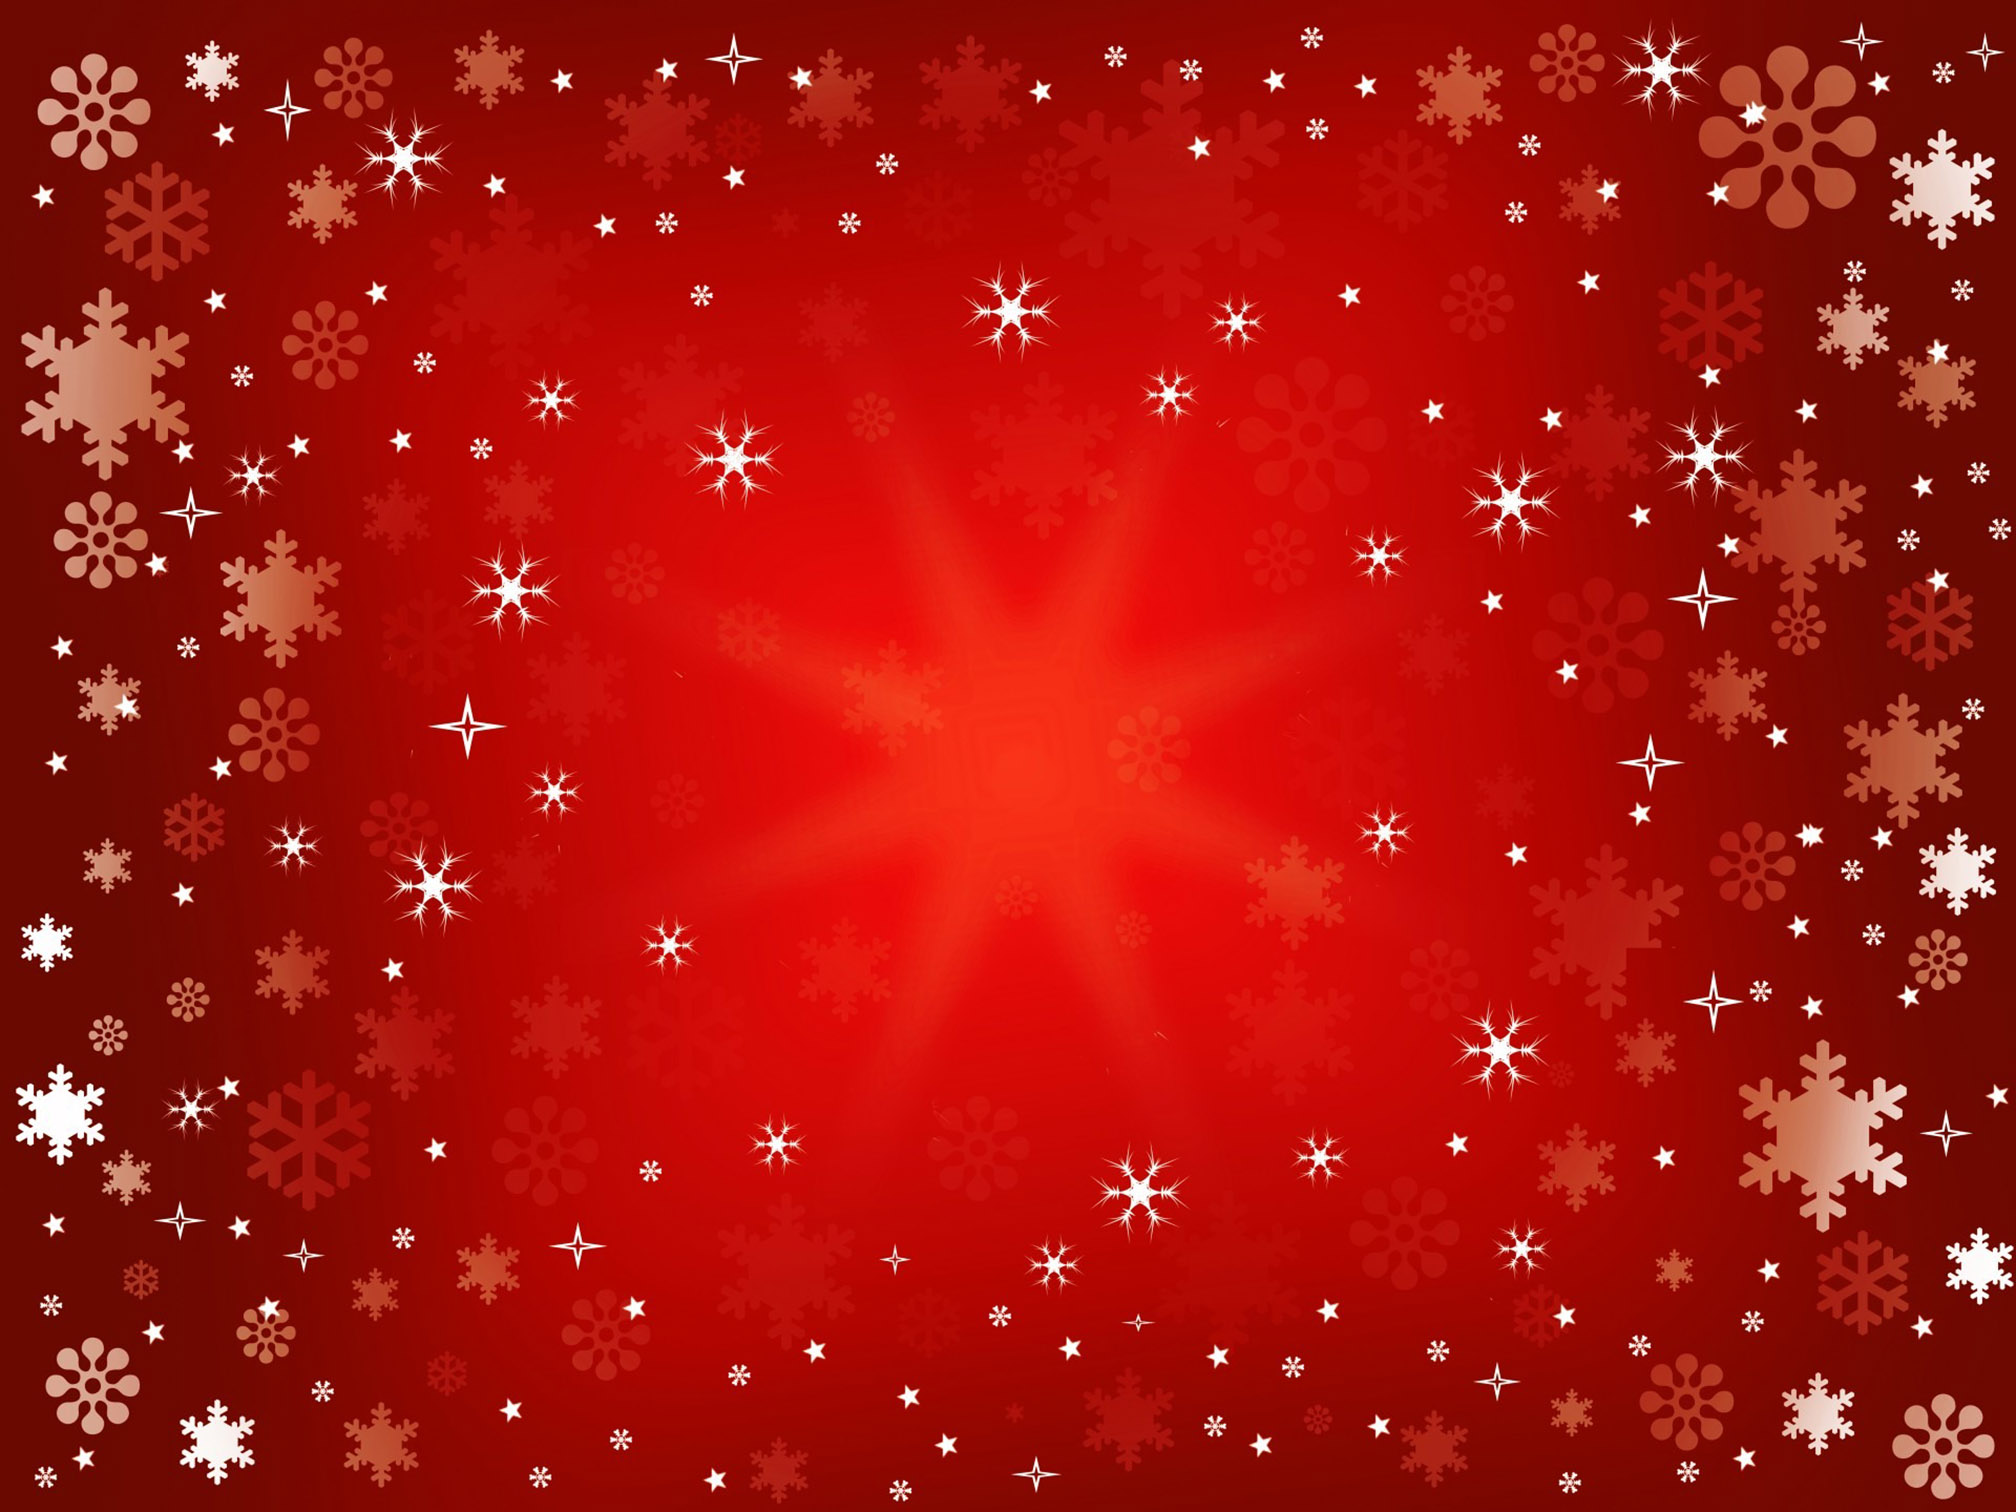 Stars At Xmas Background Image Cards Or Christmas Wallpaper